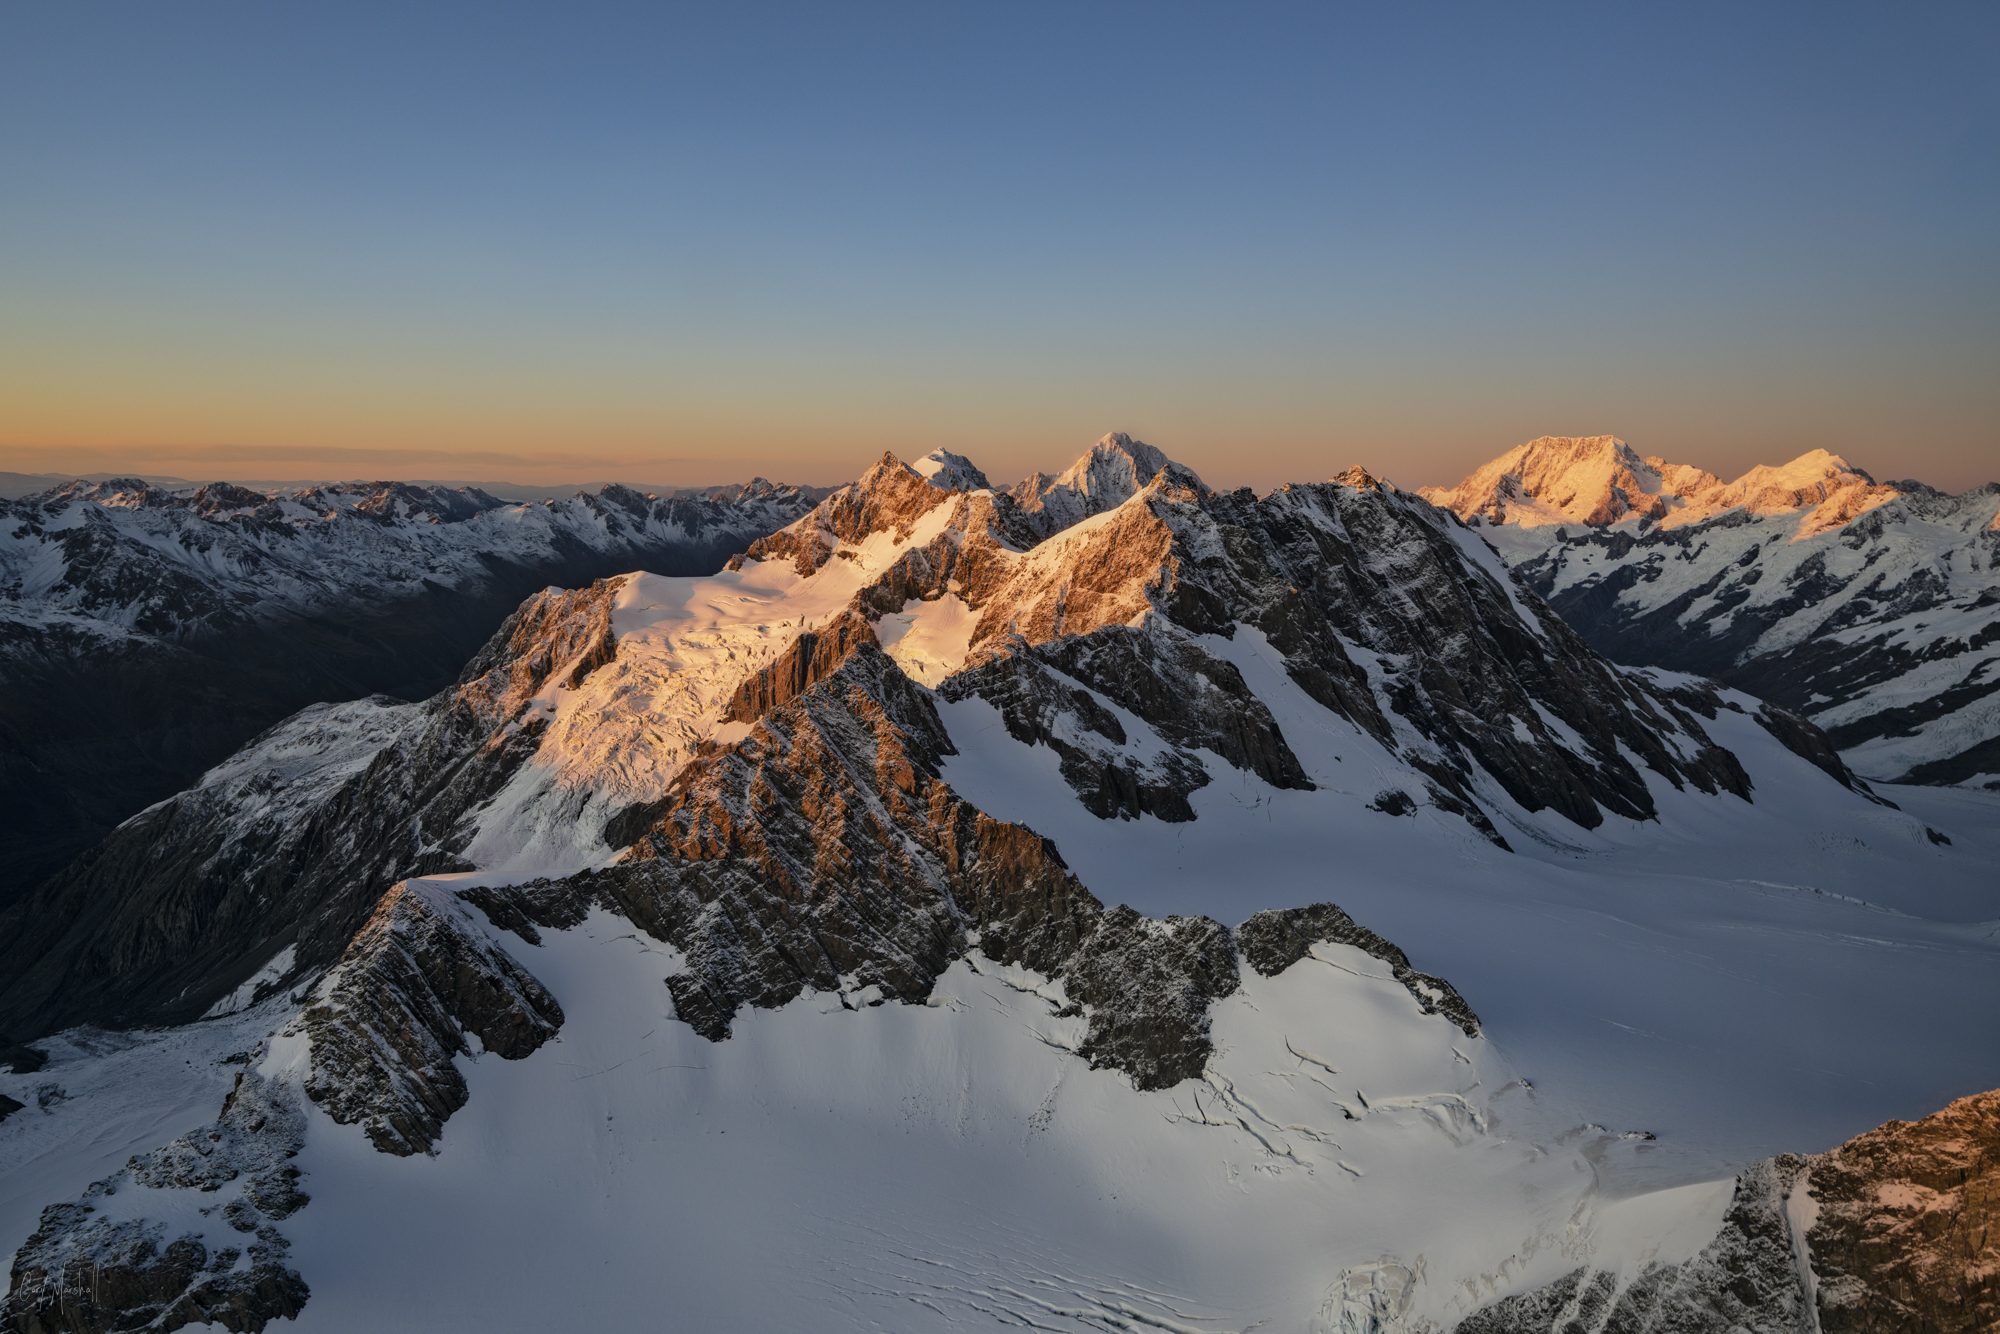 MT COOK FROM THE AIR: WHAT TO EXPECT